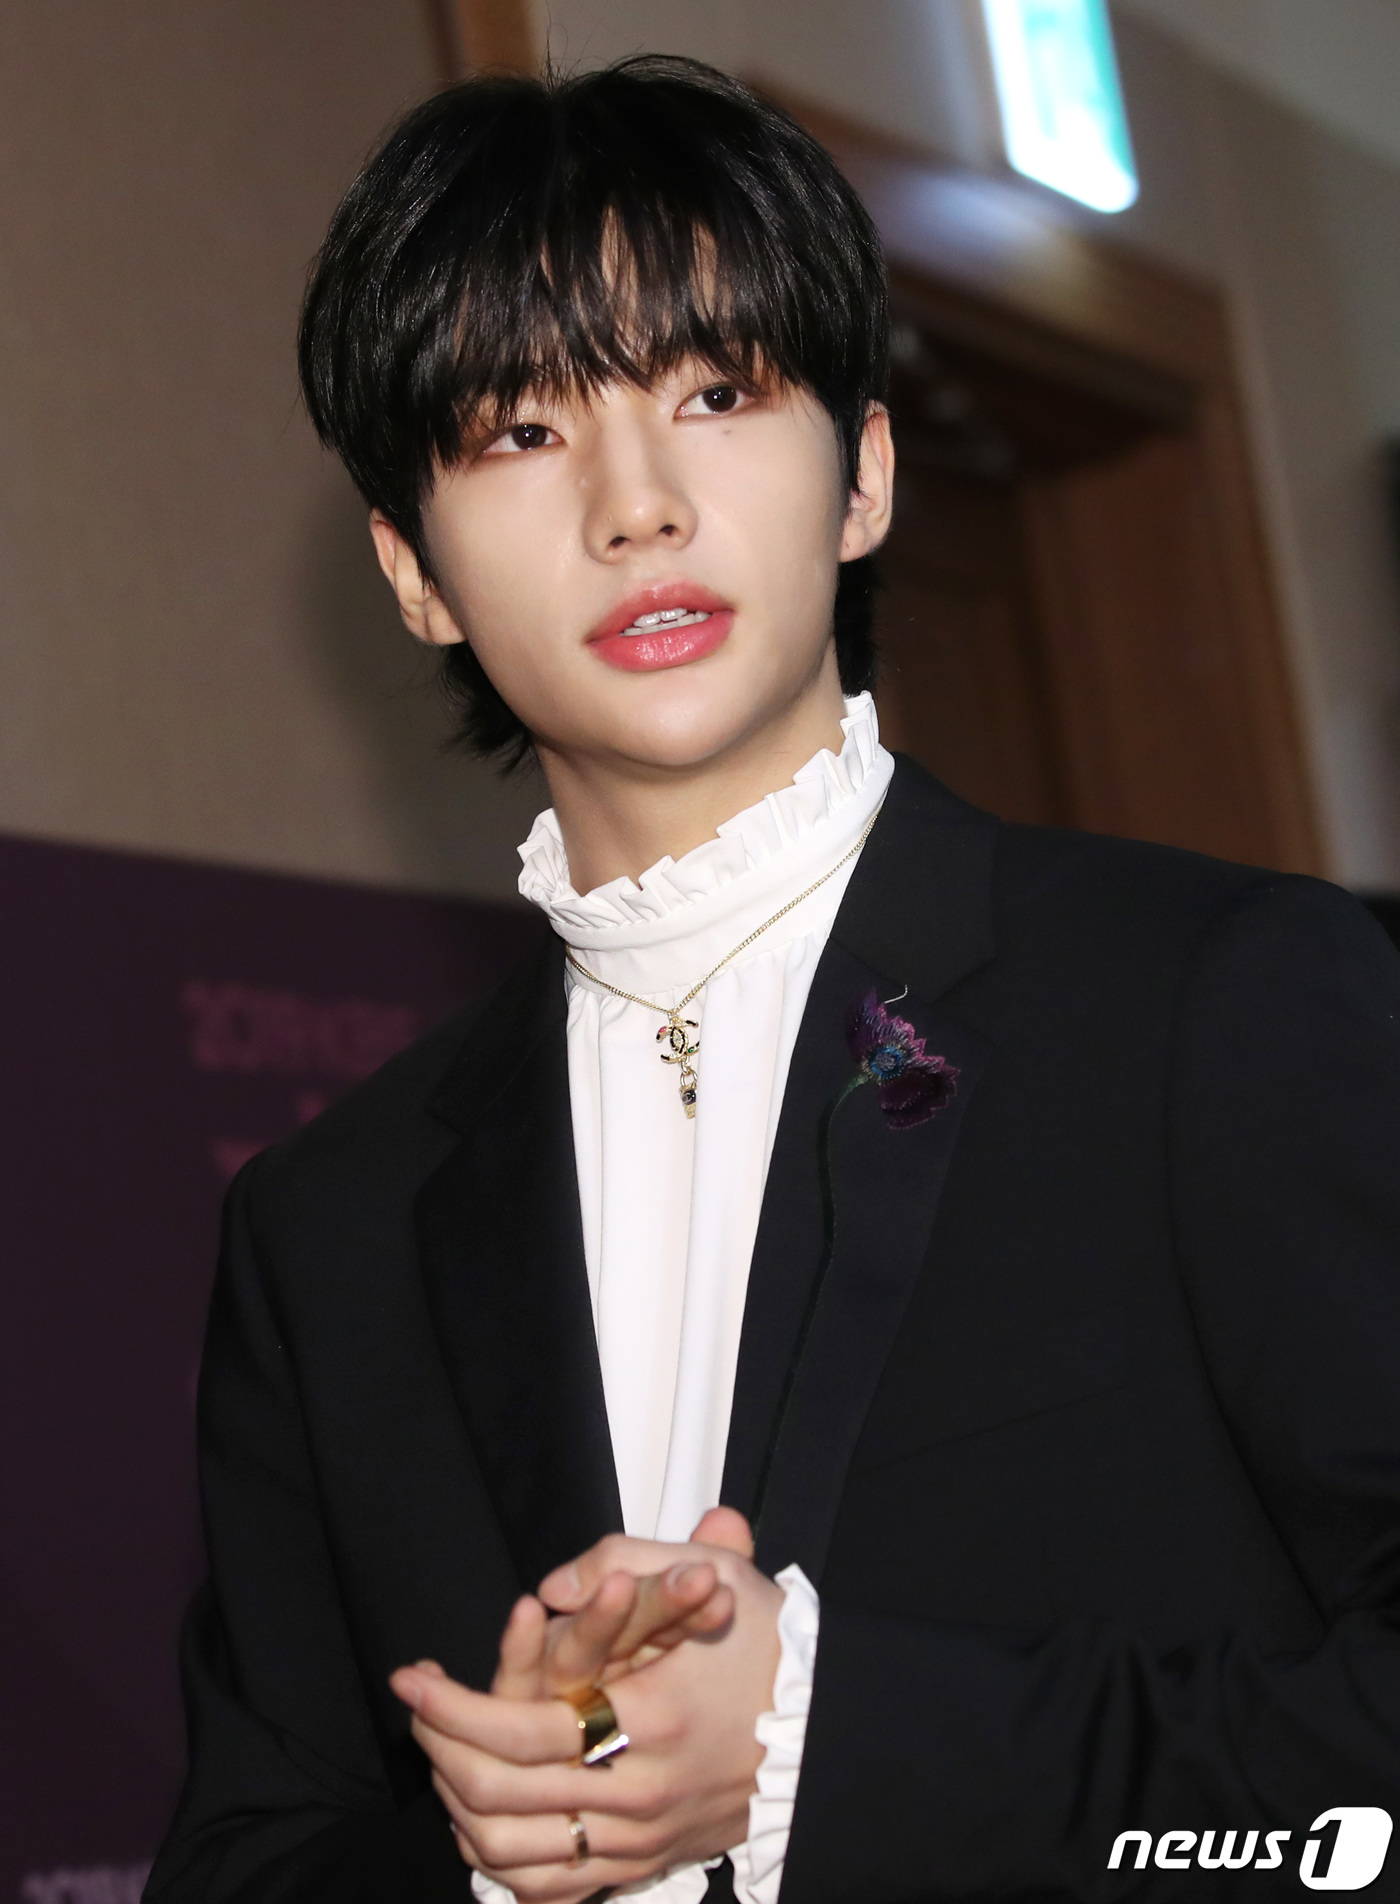 stray-kids-to-reportedly-continue-recording-for-mnet-kingdom-without-hyunjin